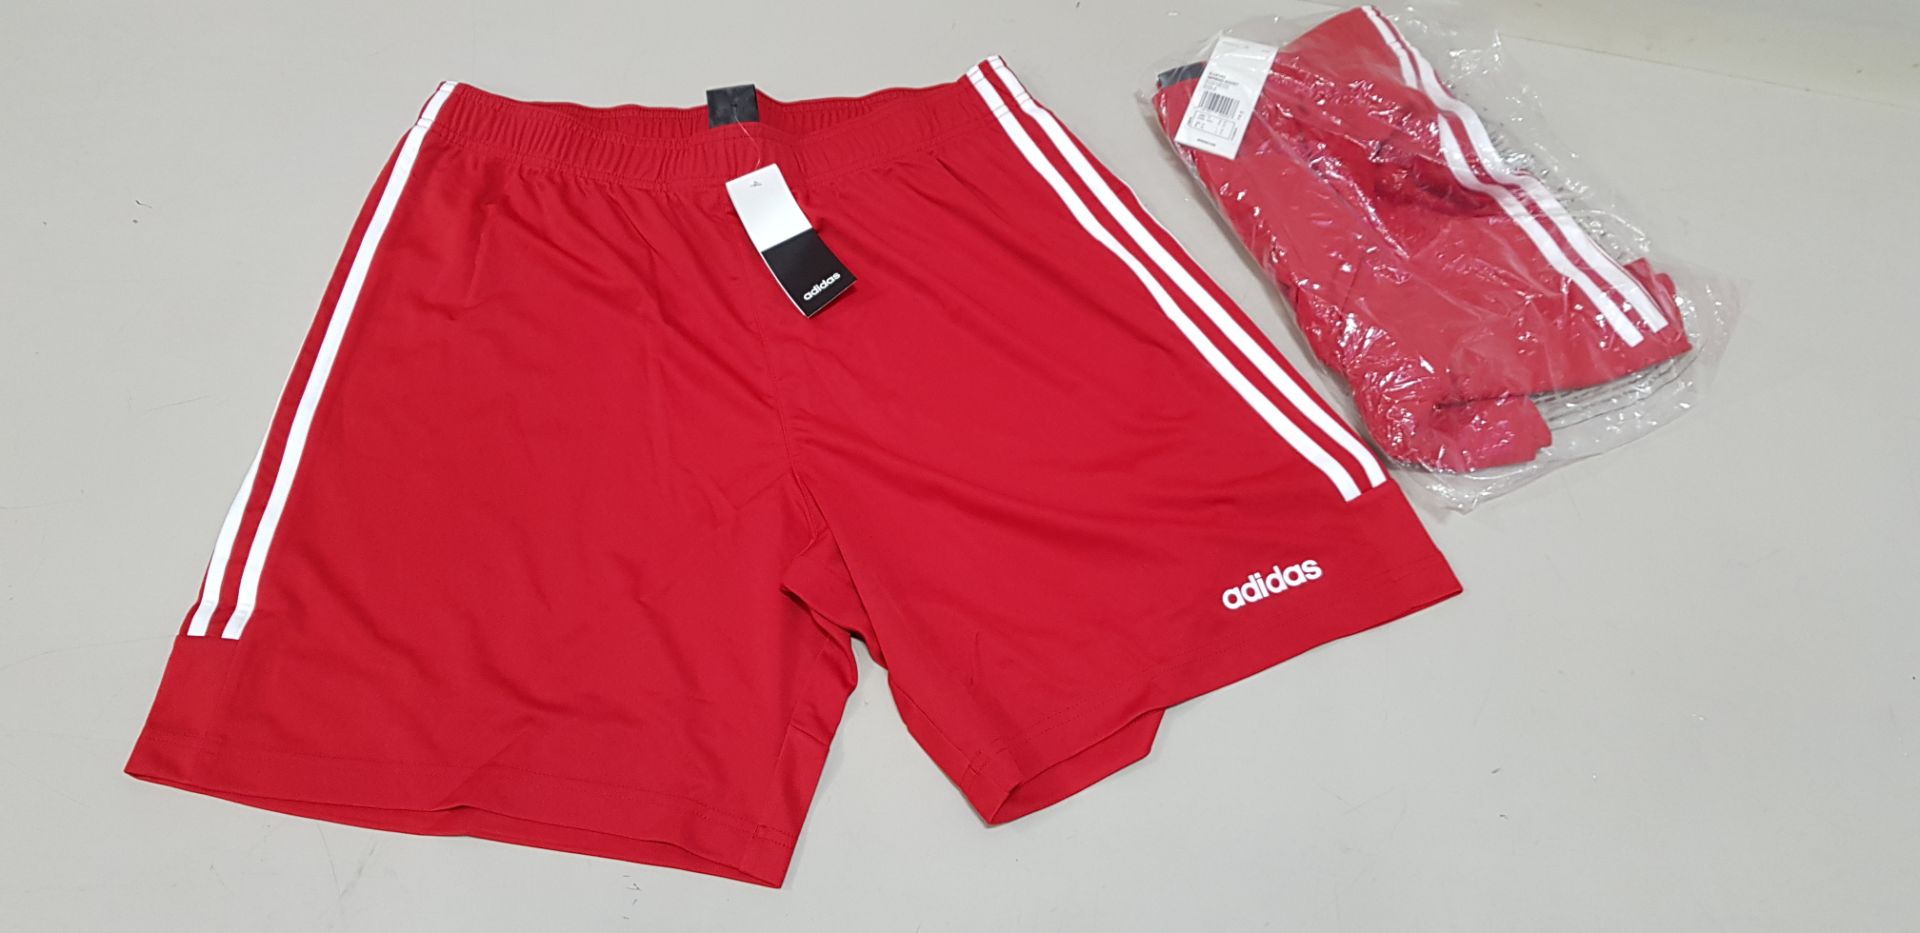 26 X BRAND NEW ADIDAS RED SERENO 3 STRIPE SHORTS IN SIZE UK SMALL